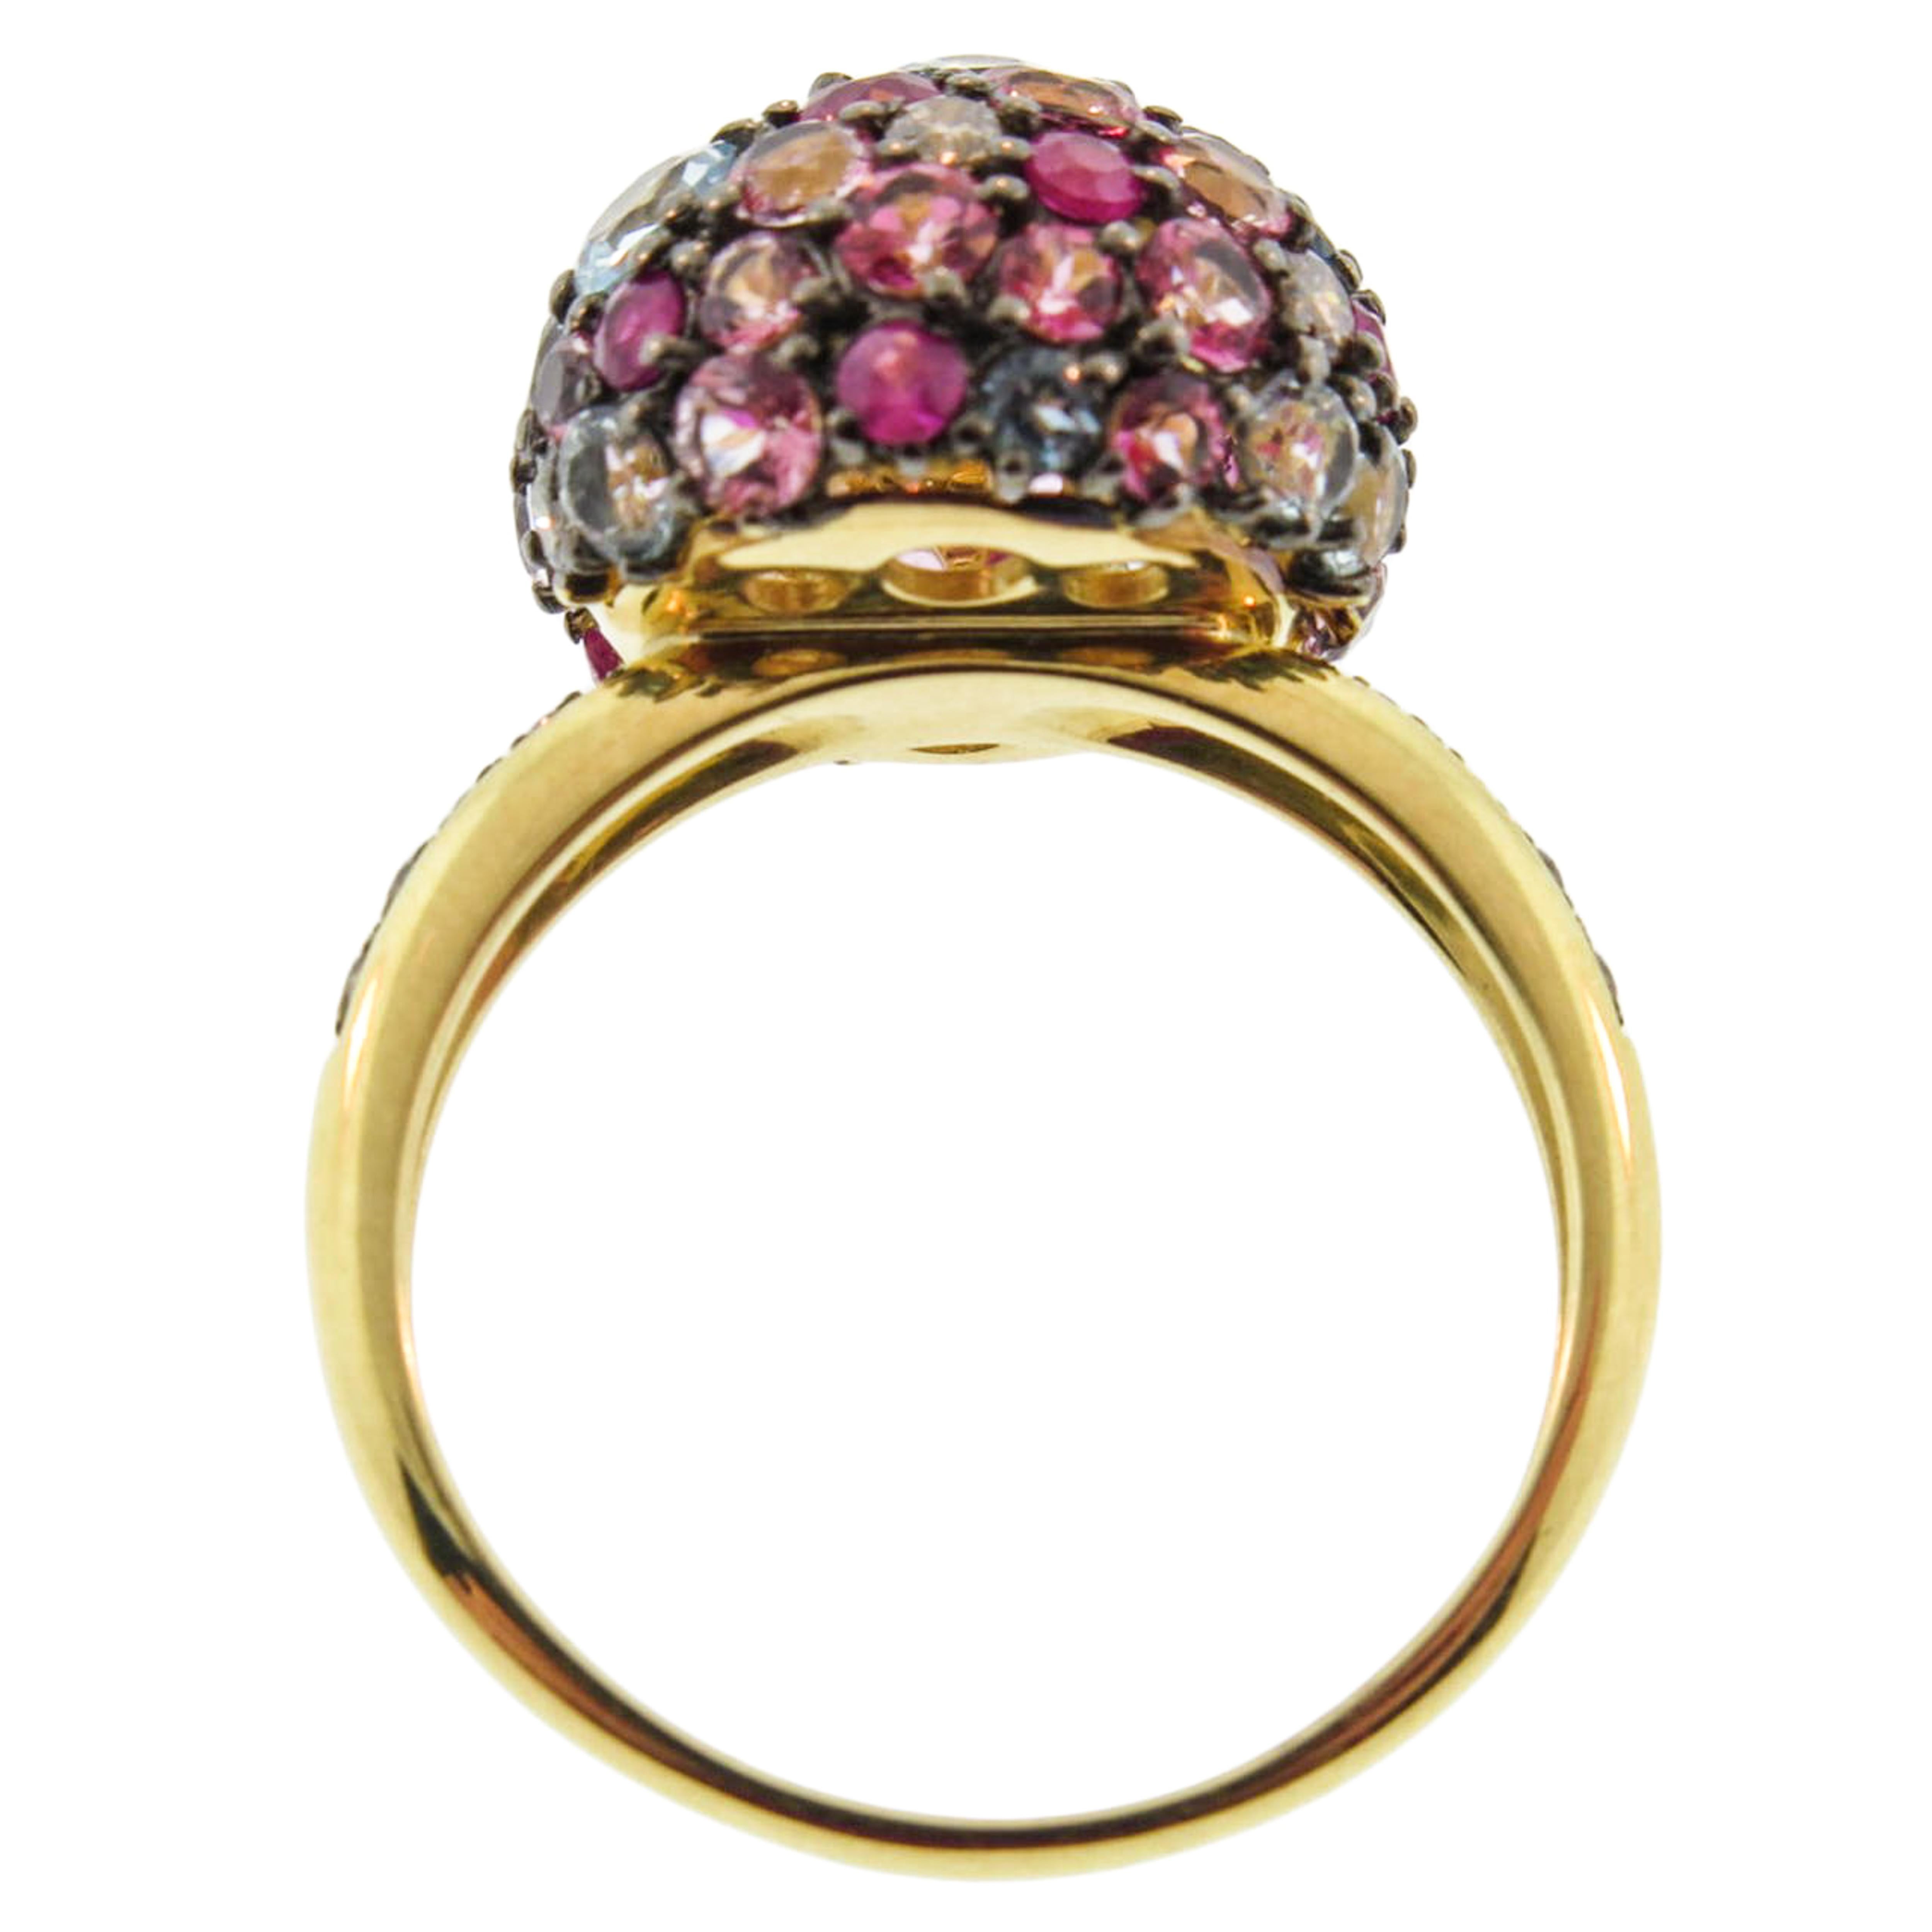 Round Cut 18 Karat Ruby, Topaz and Sapphires Pave Ball Ring by Brumani